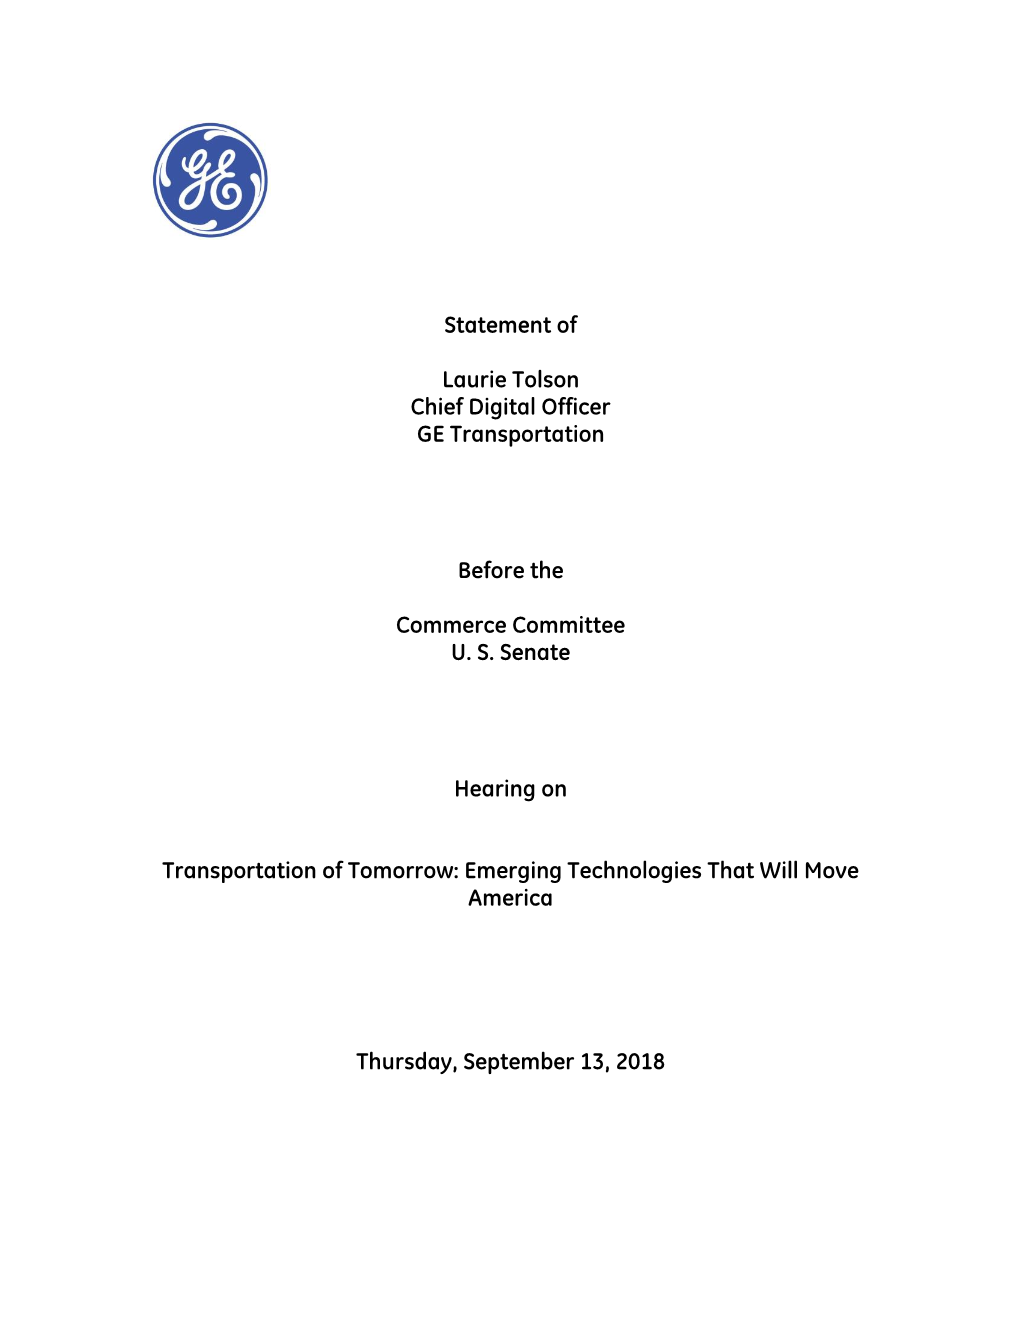 Statement of Laurie Tolson Chief Digital Officer GE Transportation Before the Commerce Committee U. S. Senate Hearing on Trans